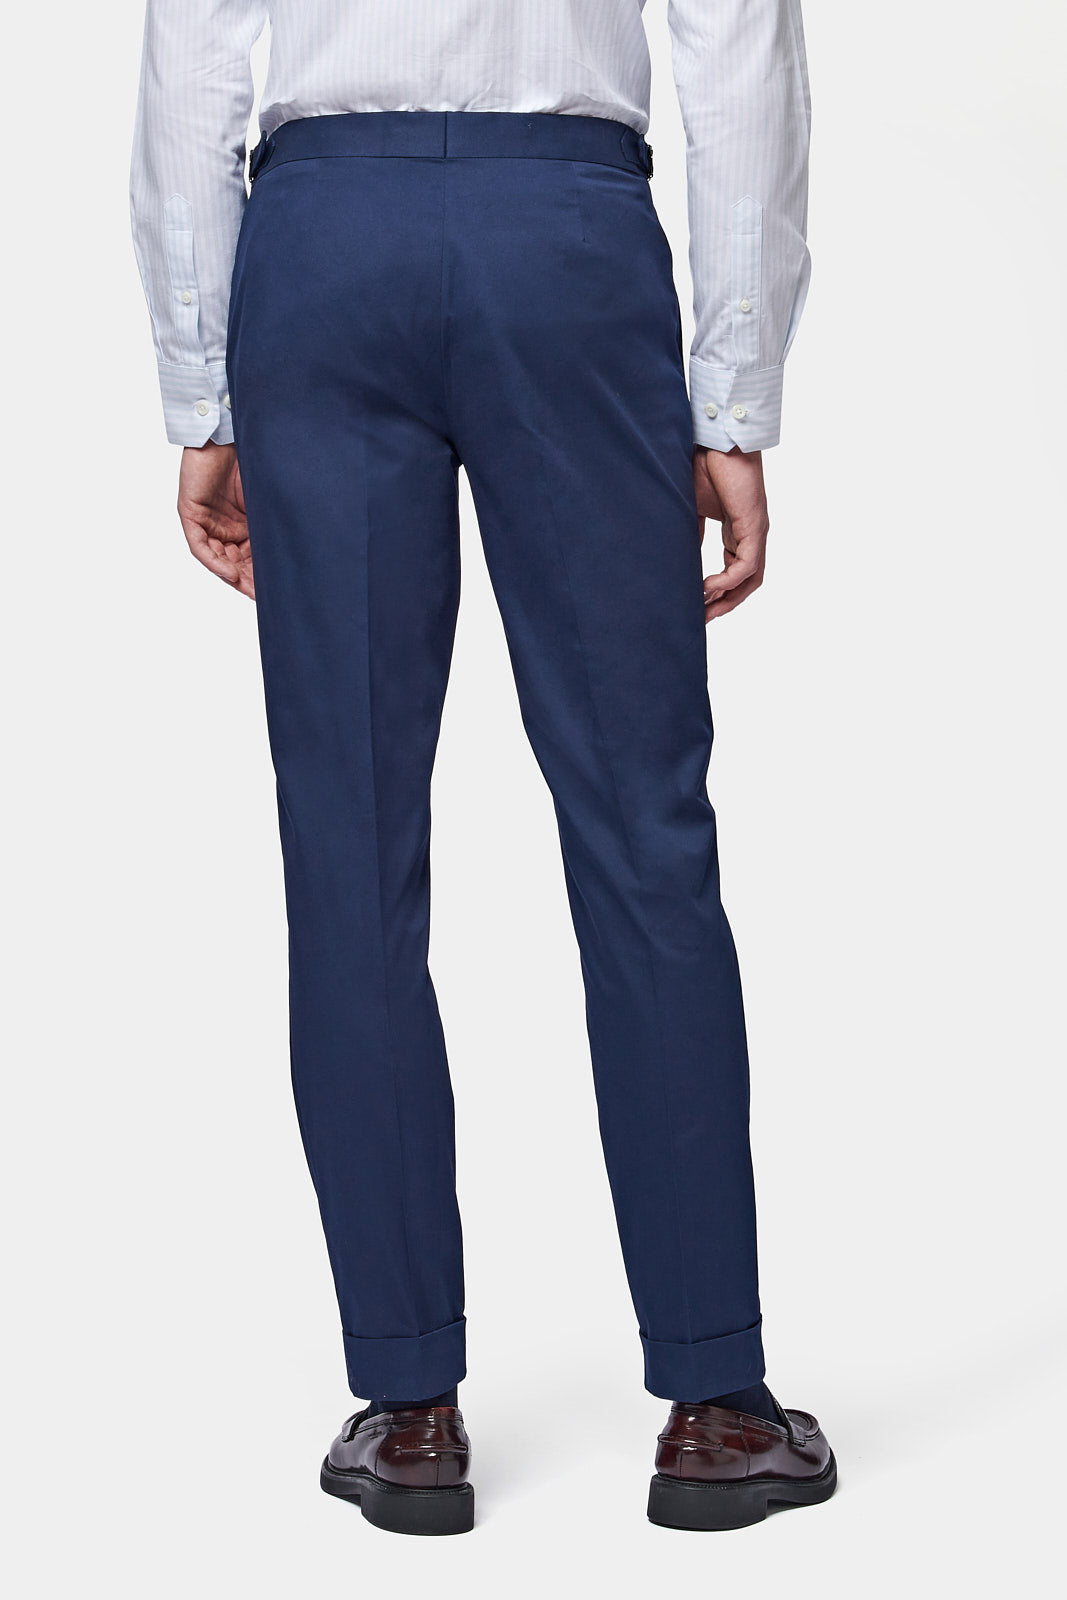 Cuffed Chino Trousers in Navy Blue